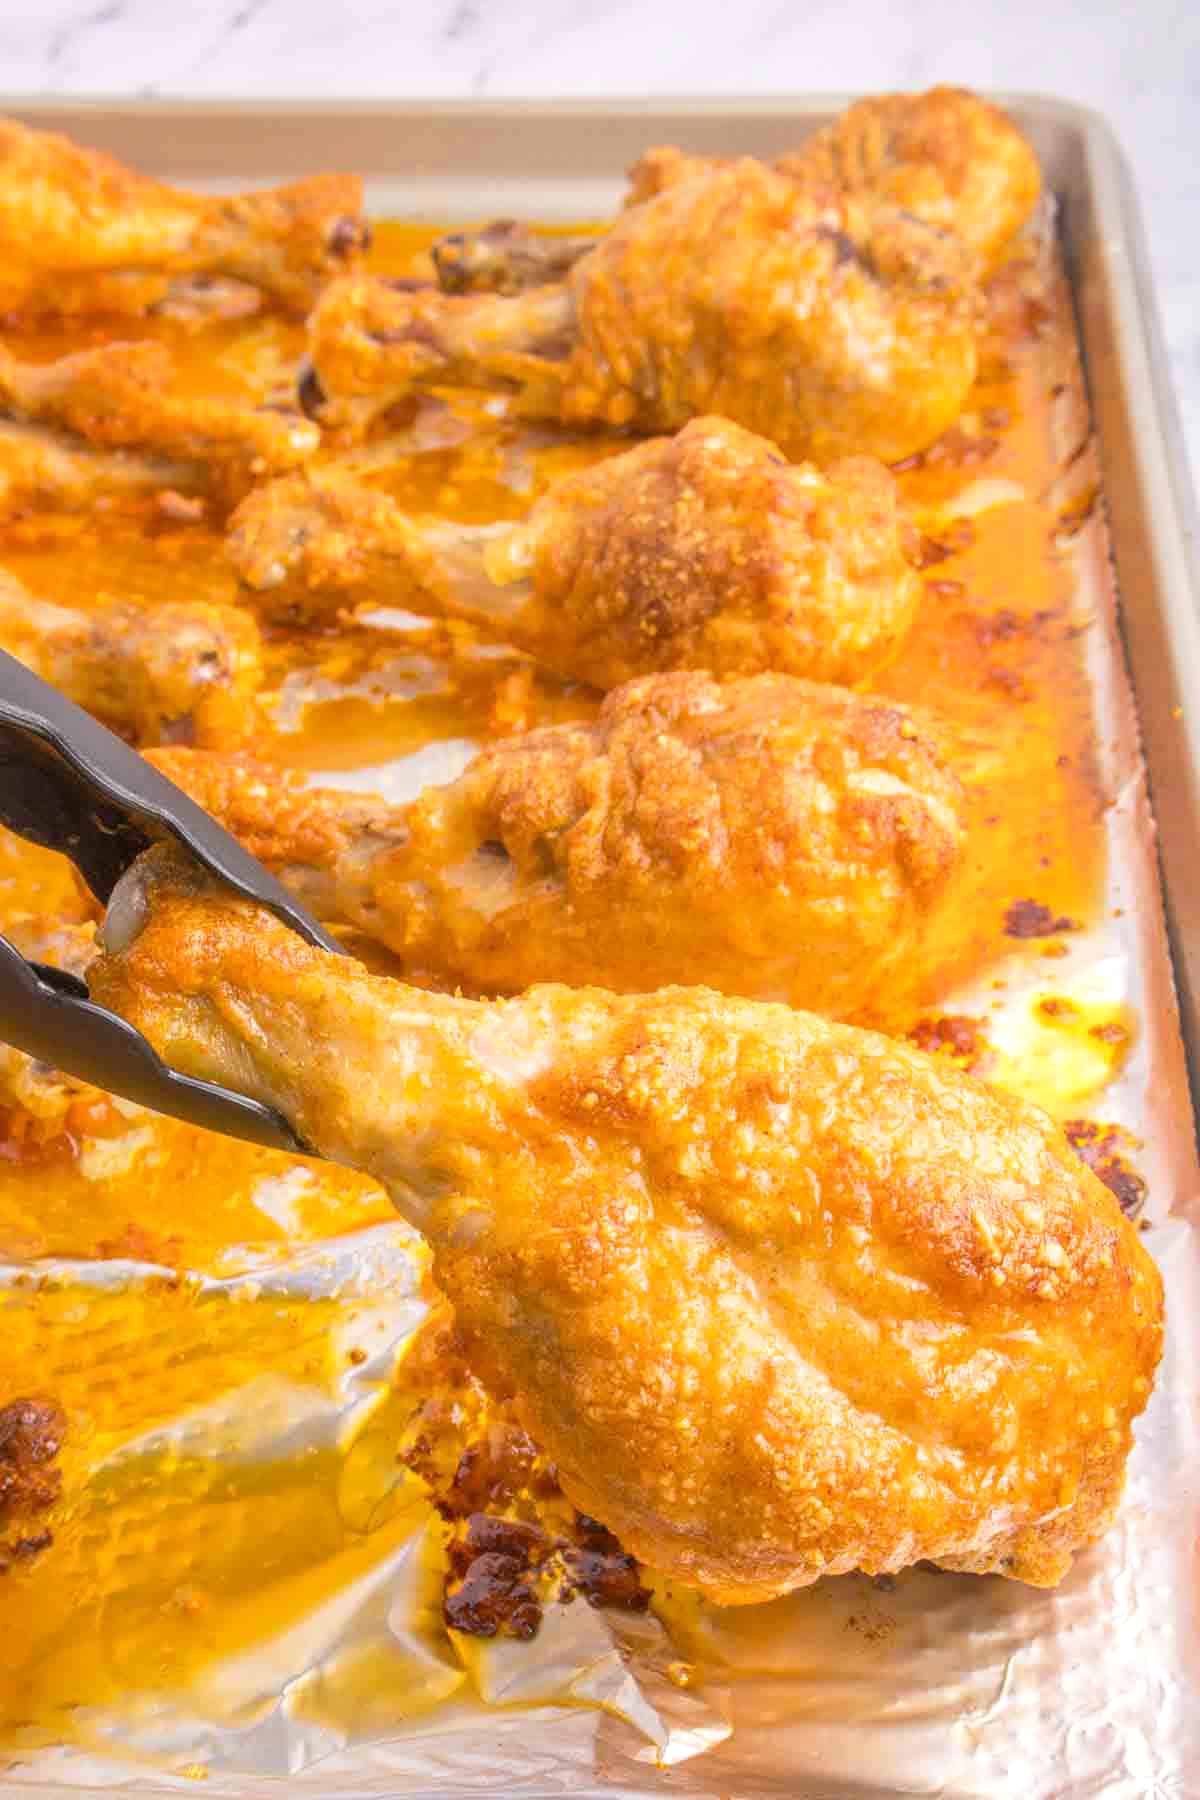 tongs lifting baked chicken drumstick from sheet pan of chicken legs